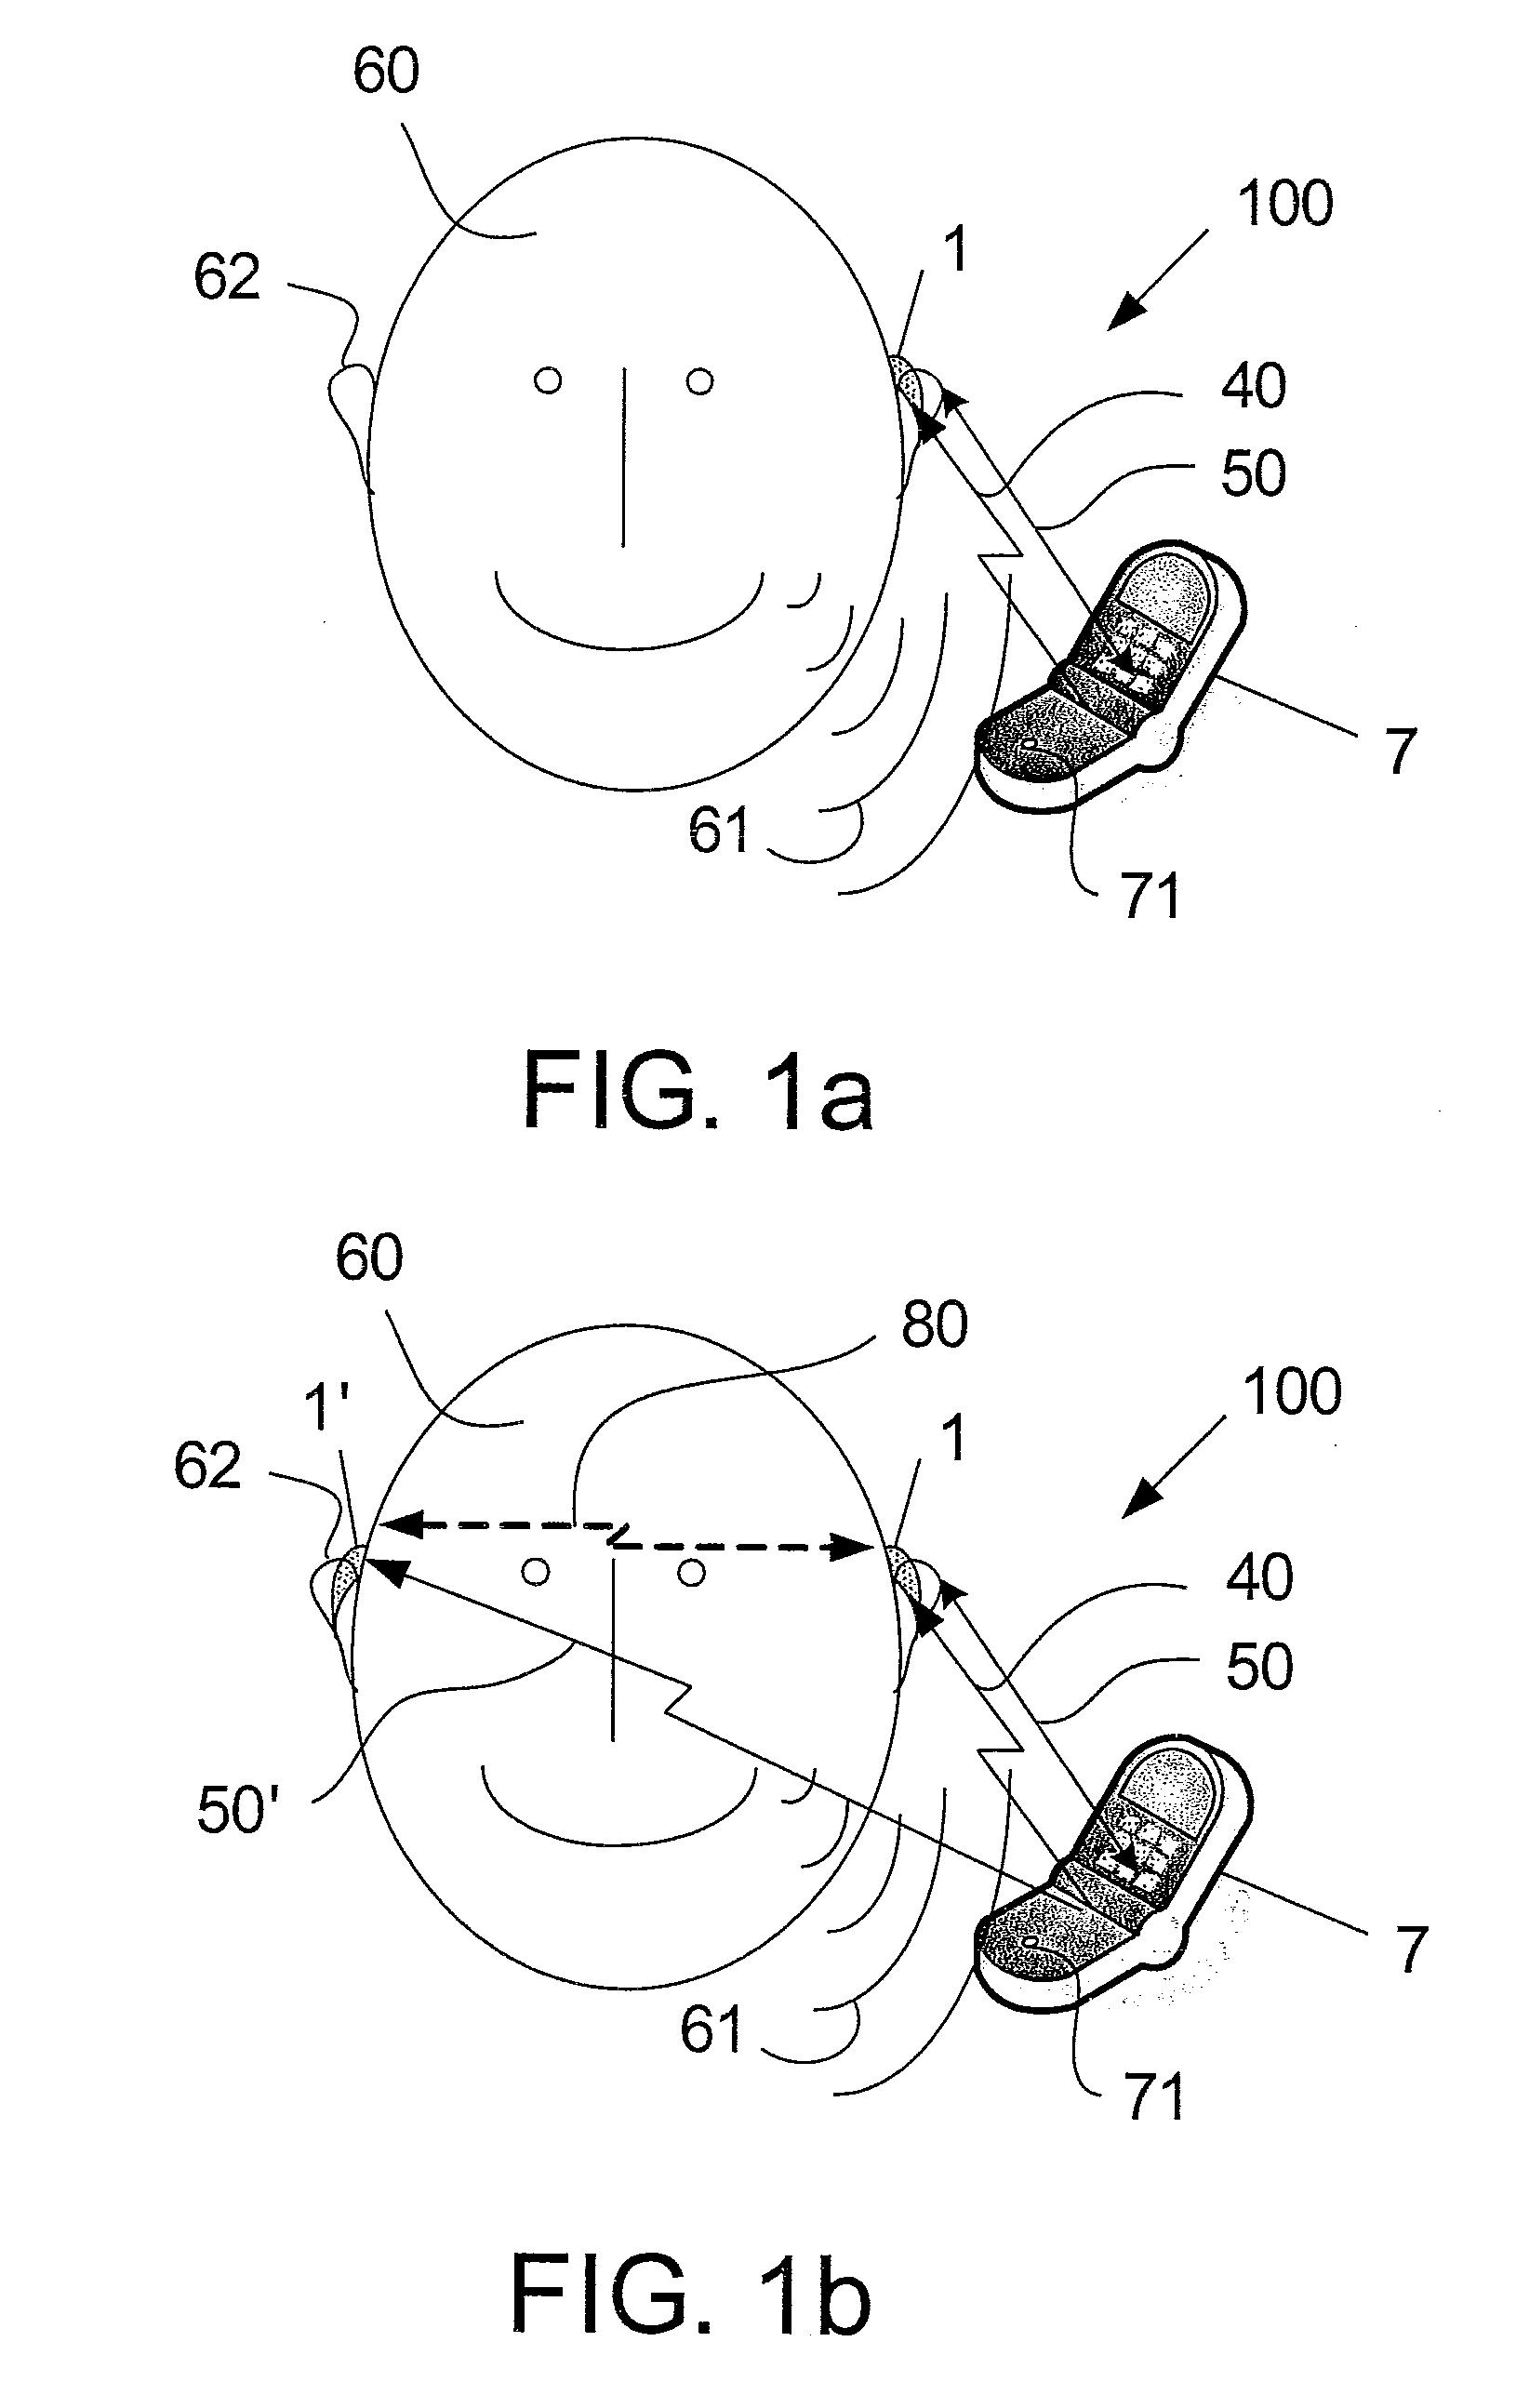 Hearing aid system with a low power wireless link between a hearing instrument and a telephone